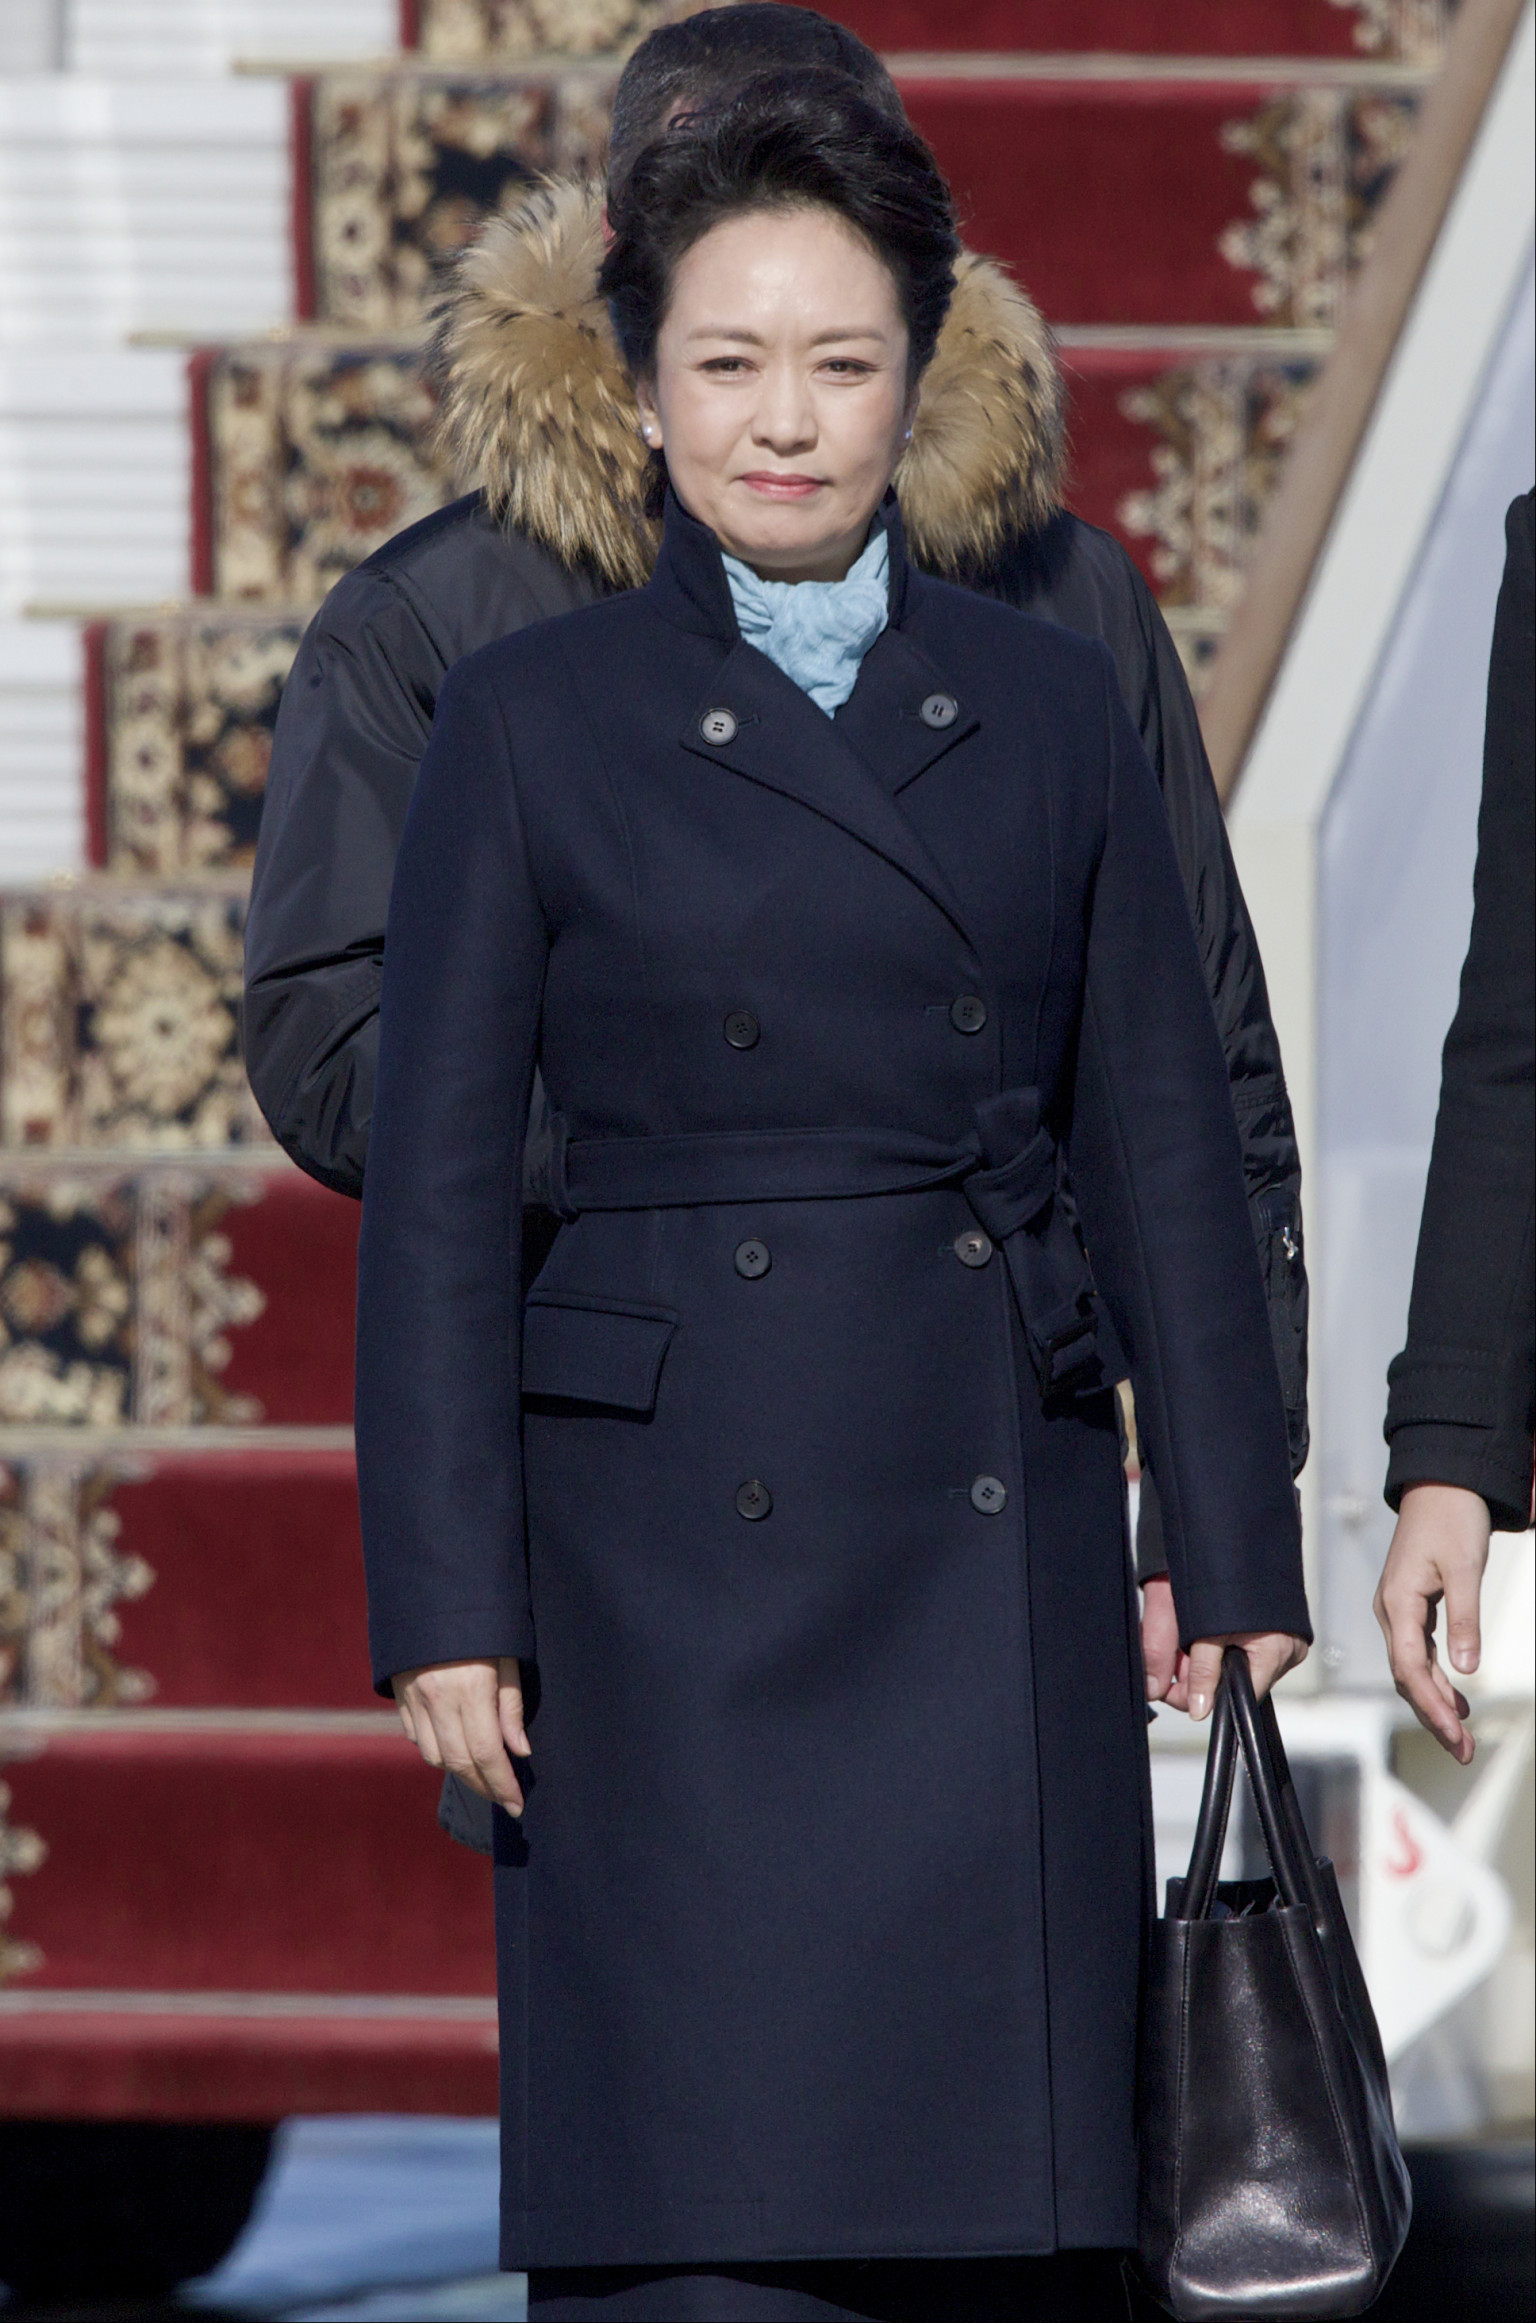 Peng Liyuan Is Best-Dressed First Lady, Vanity Fair Says (PHOTOS) | HuffPost1536 x 2323